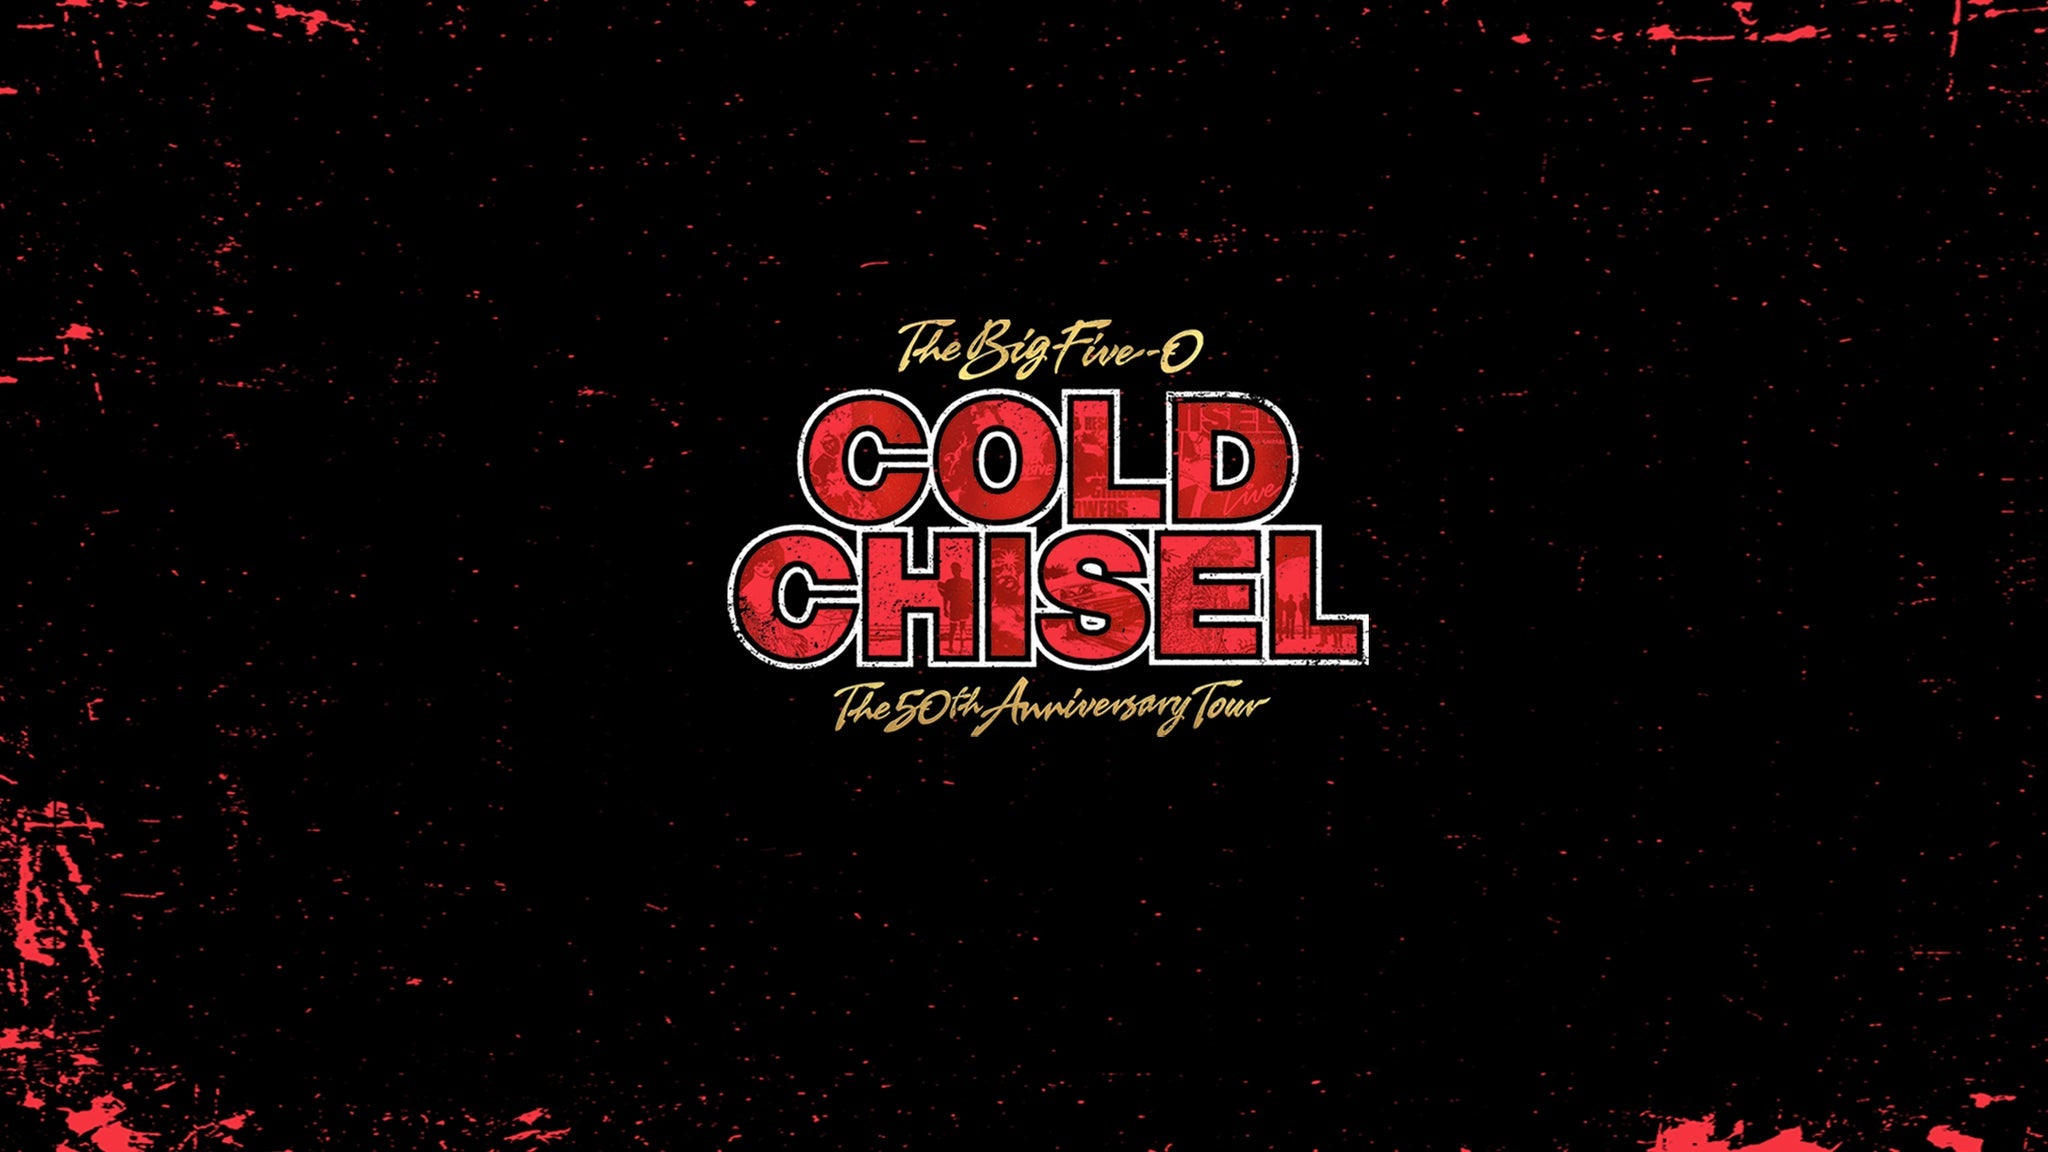 Cold Chisel - The Big Five-0 50th Anniversary Tour